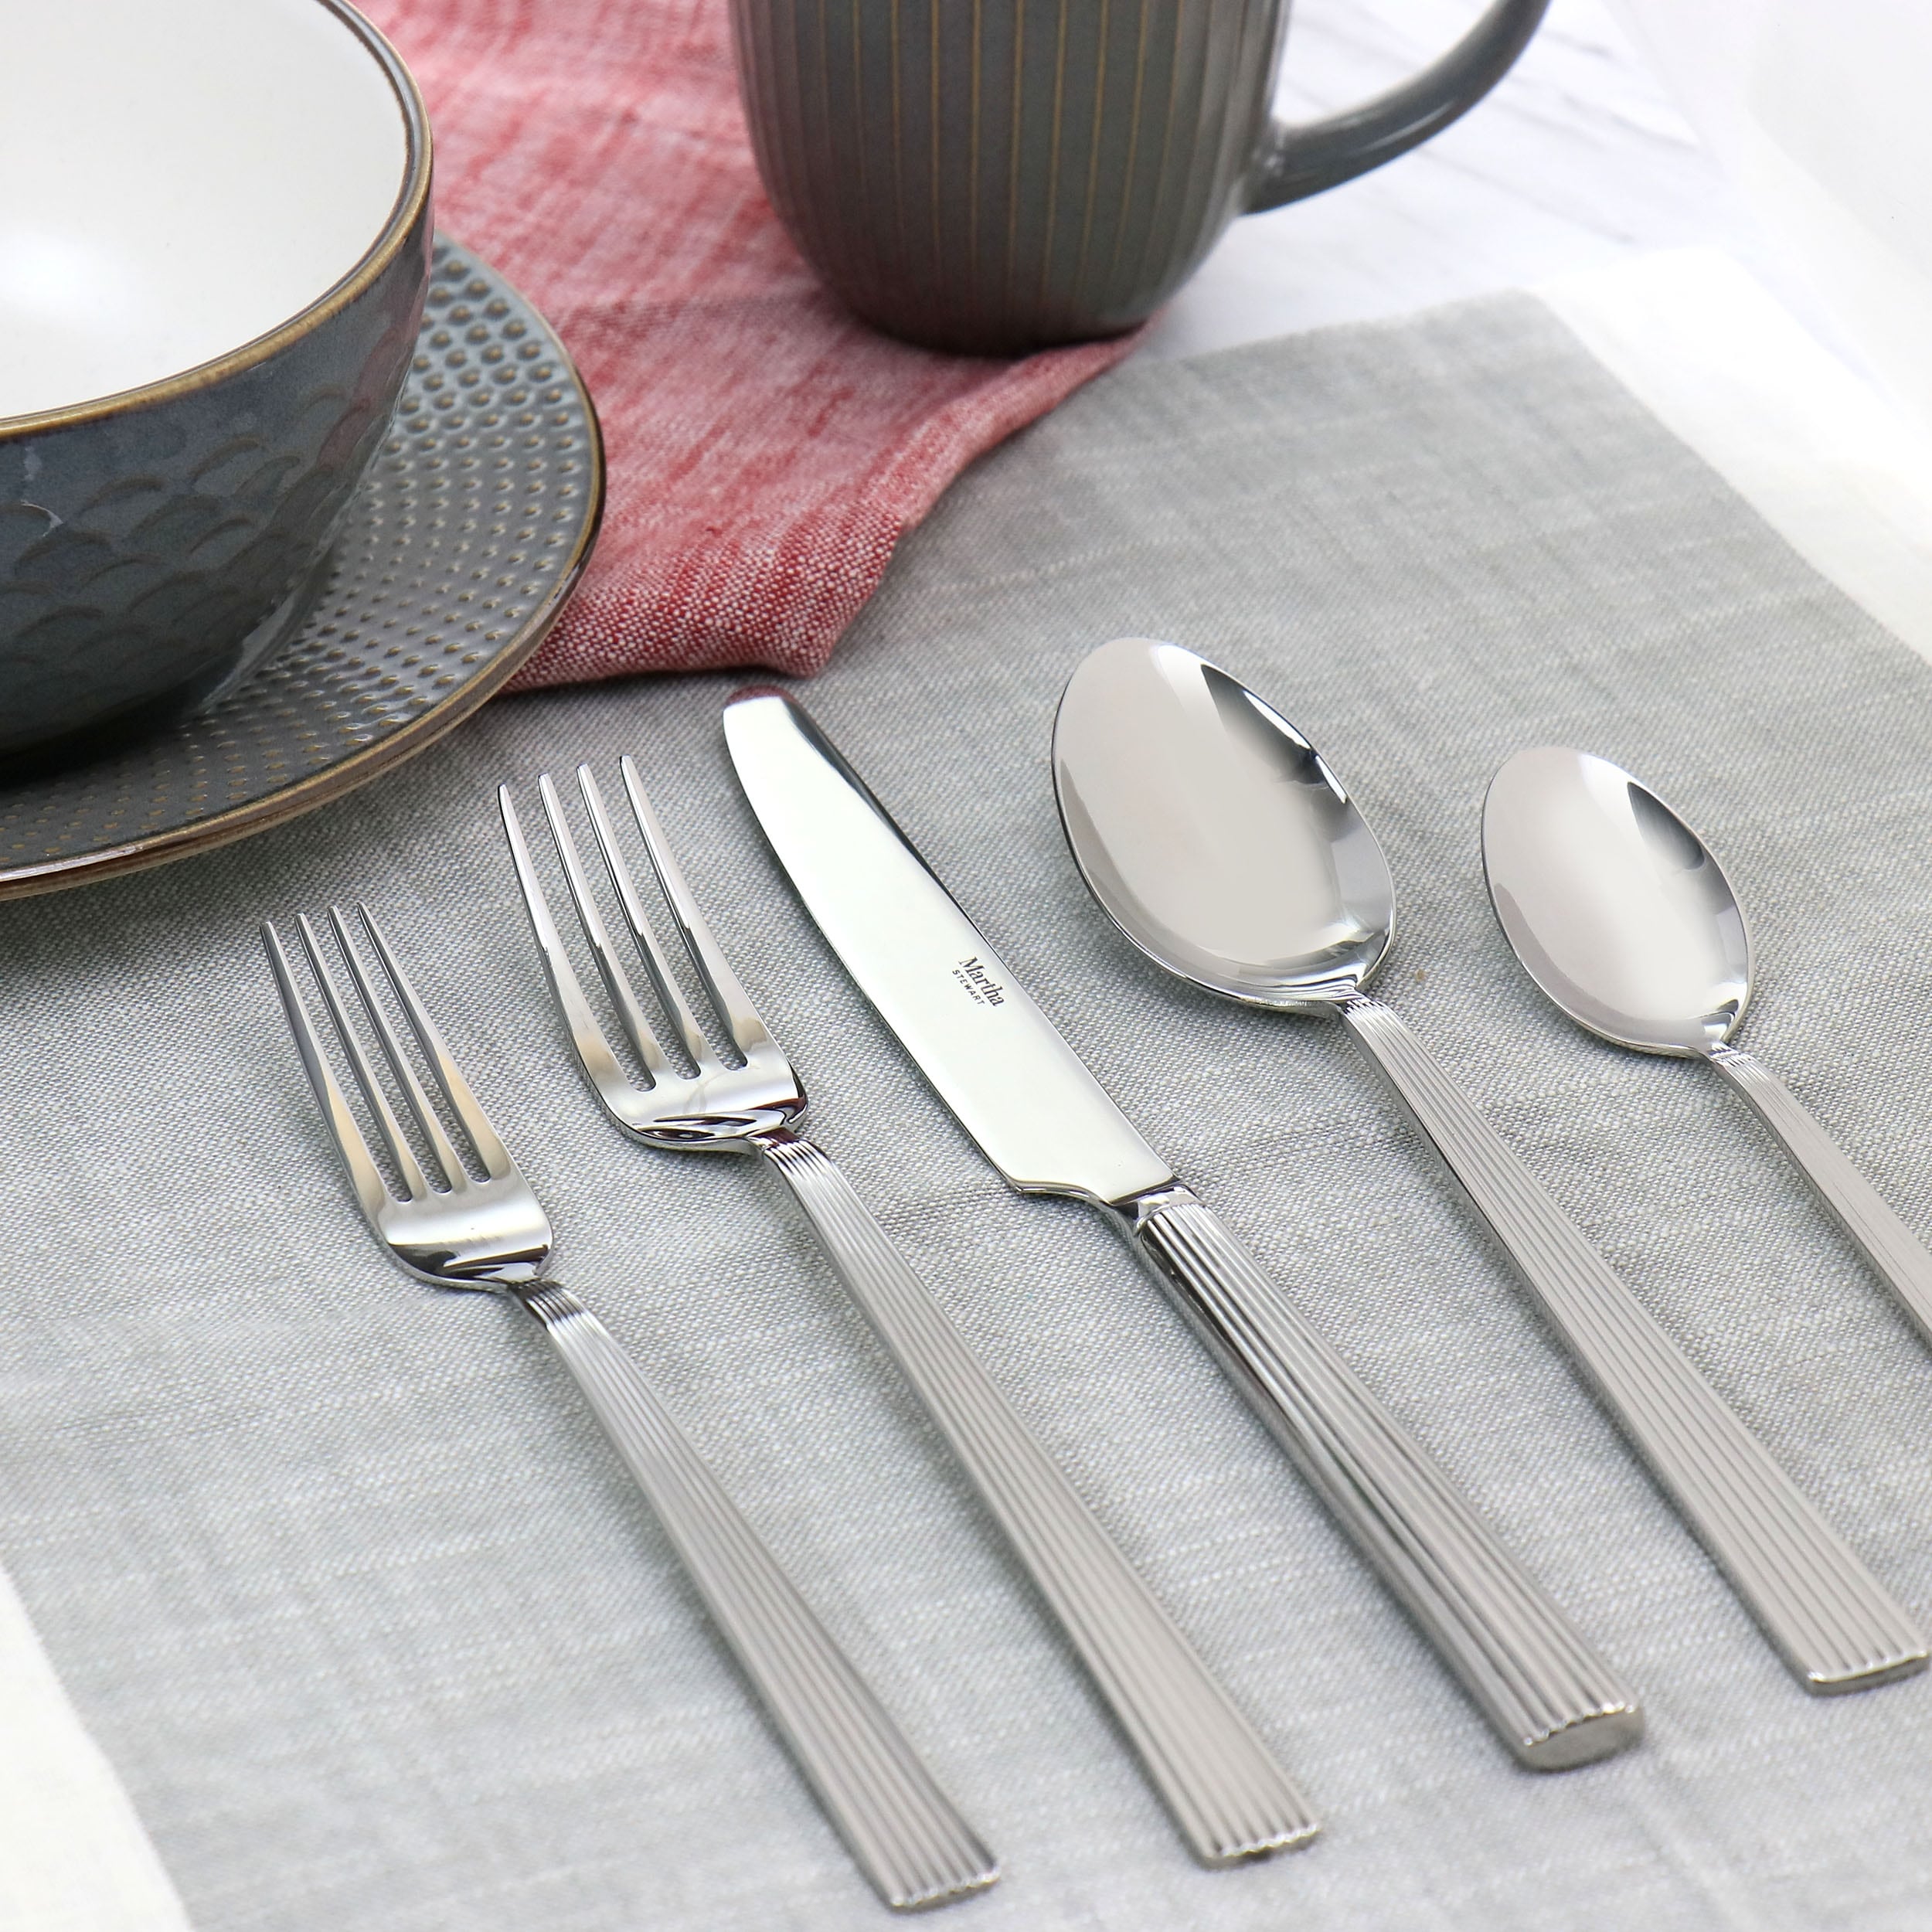 https://ak1.ostkcdn.com/images/products/is/images/direct/7035daf2487111912f67369d943066a5e5eb3356/Martha-Stewart-Carlyle-20-Piece-Flatware-Set.jpg